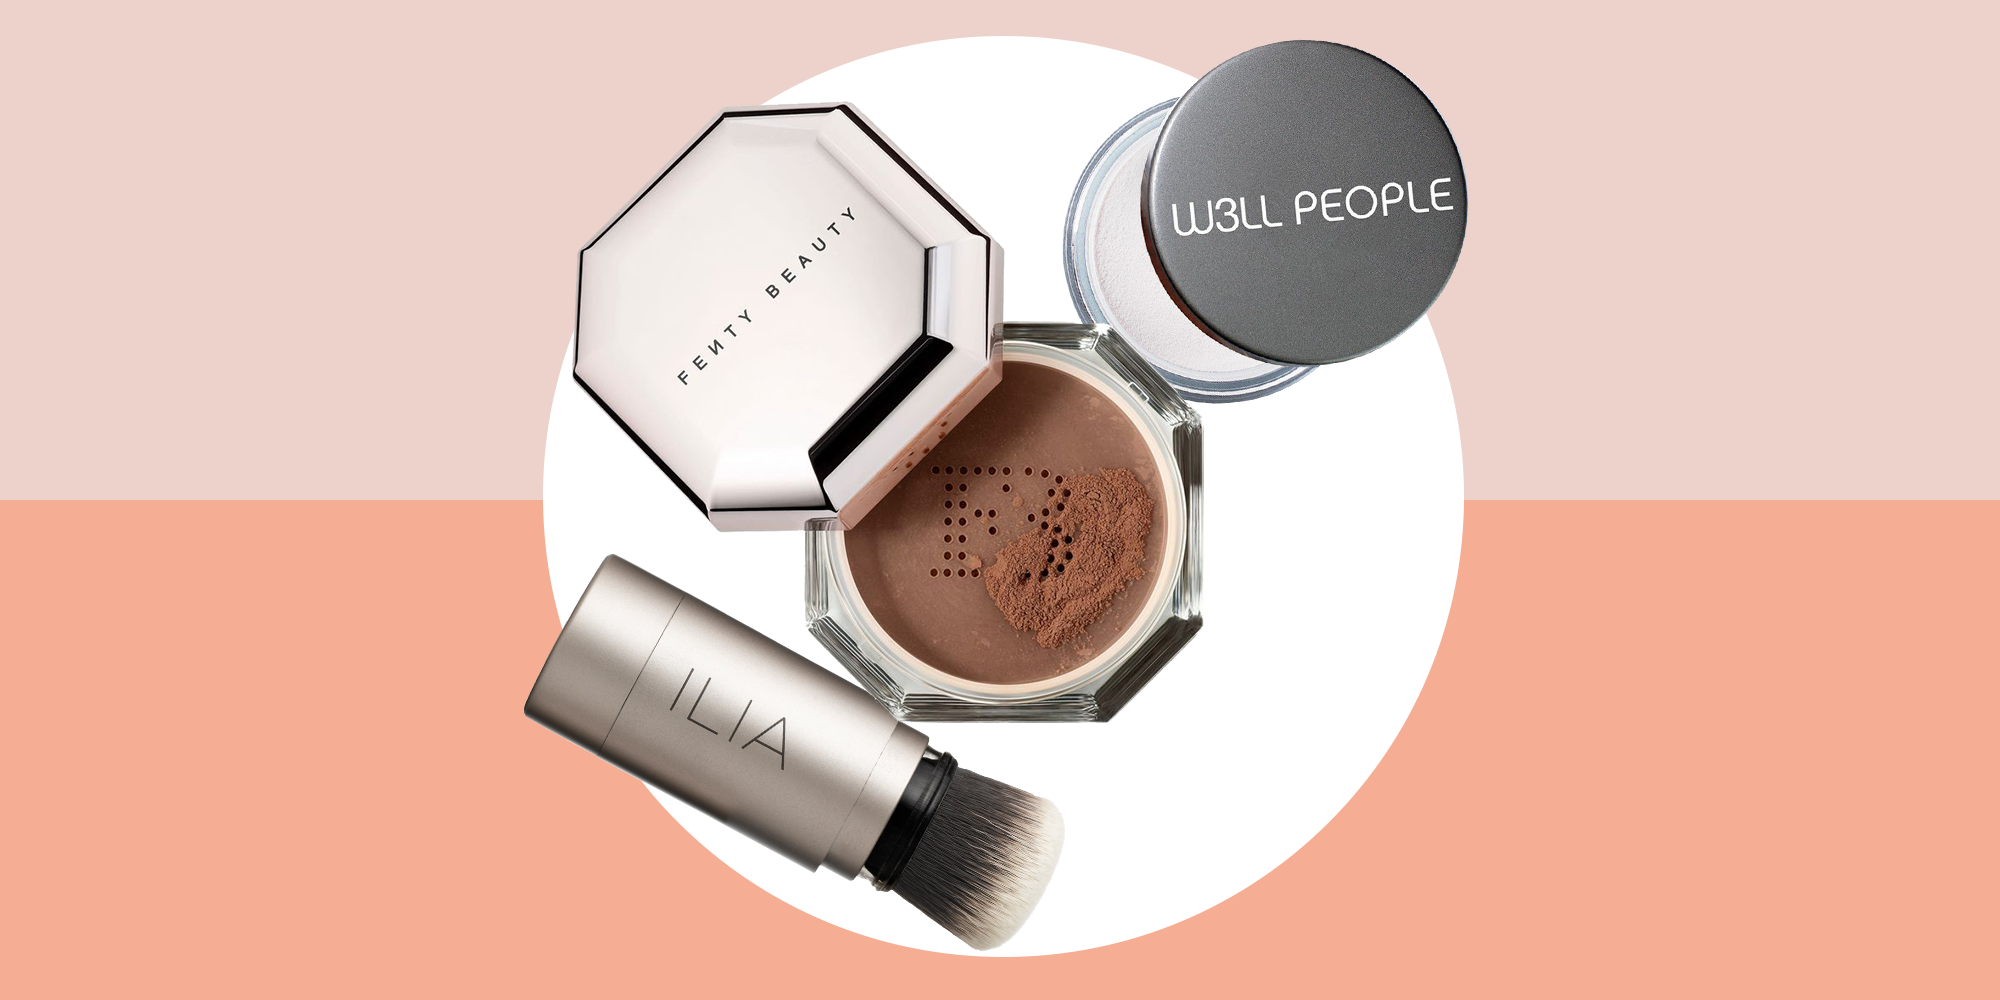 best long lasting compact powder for oily skin